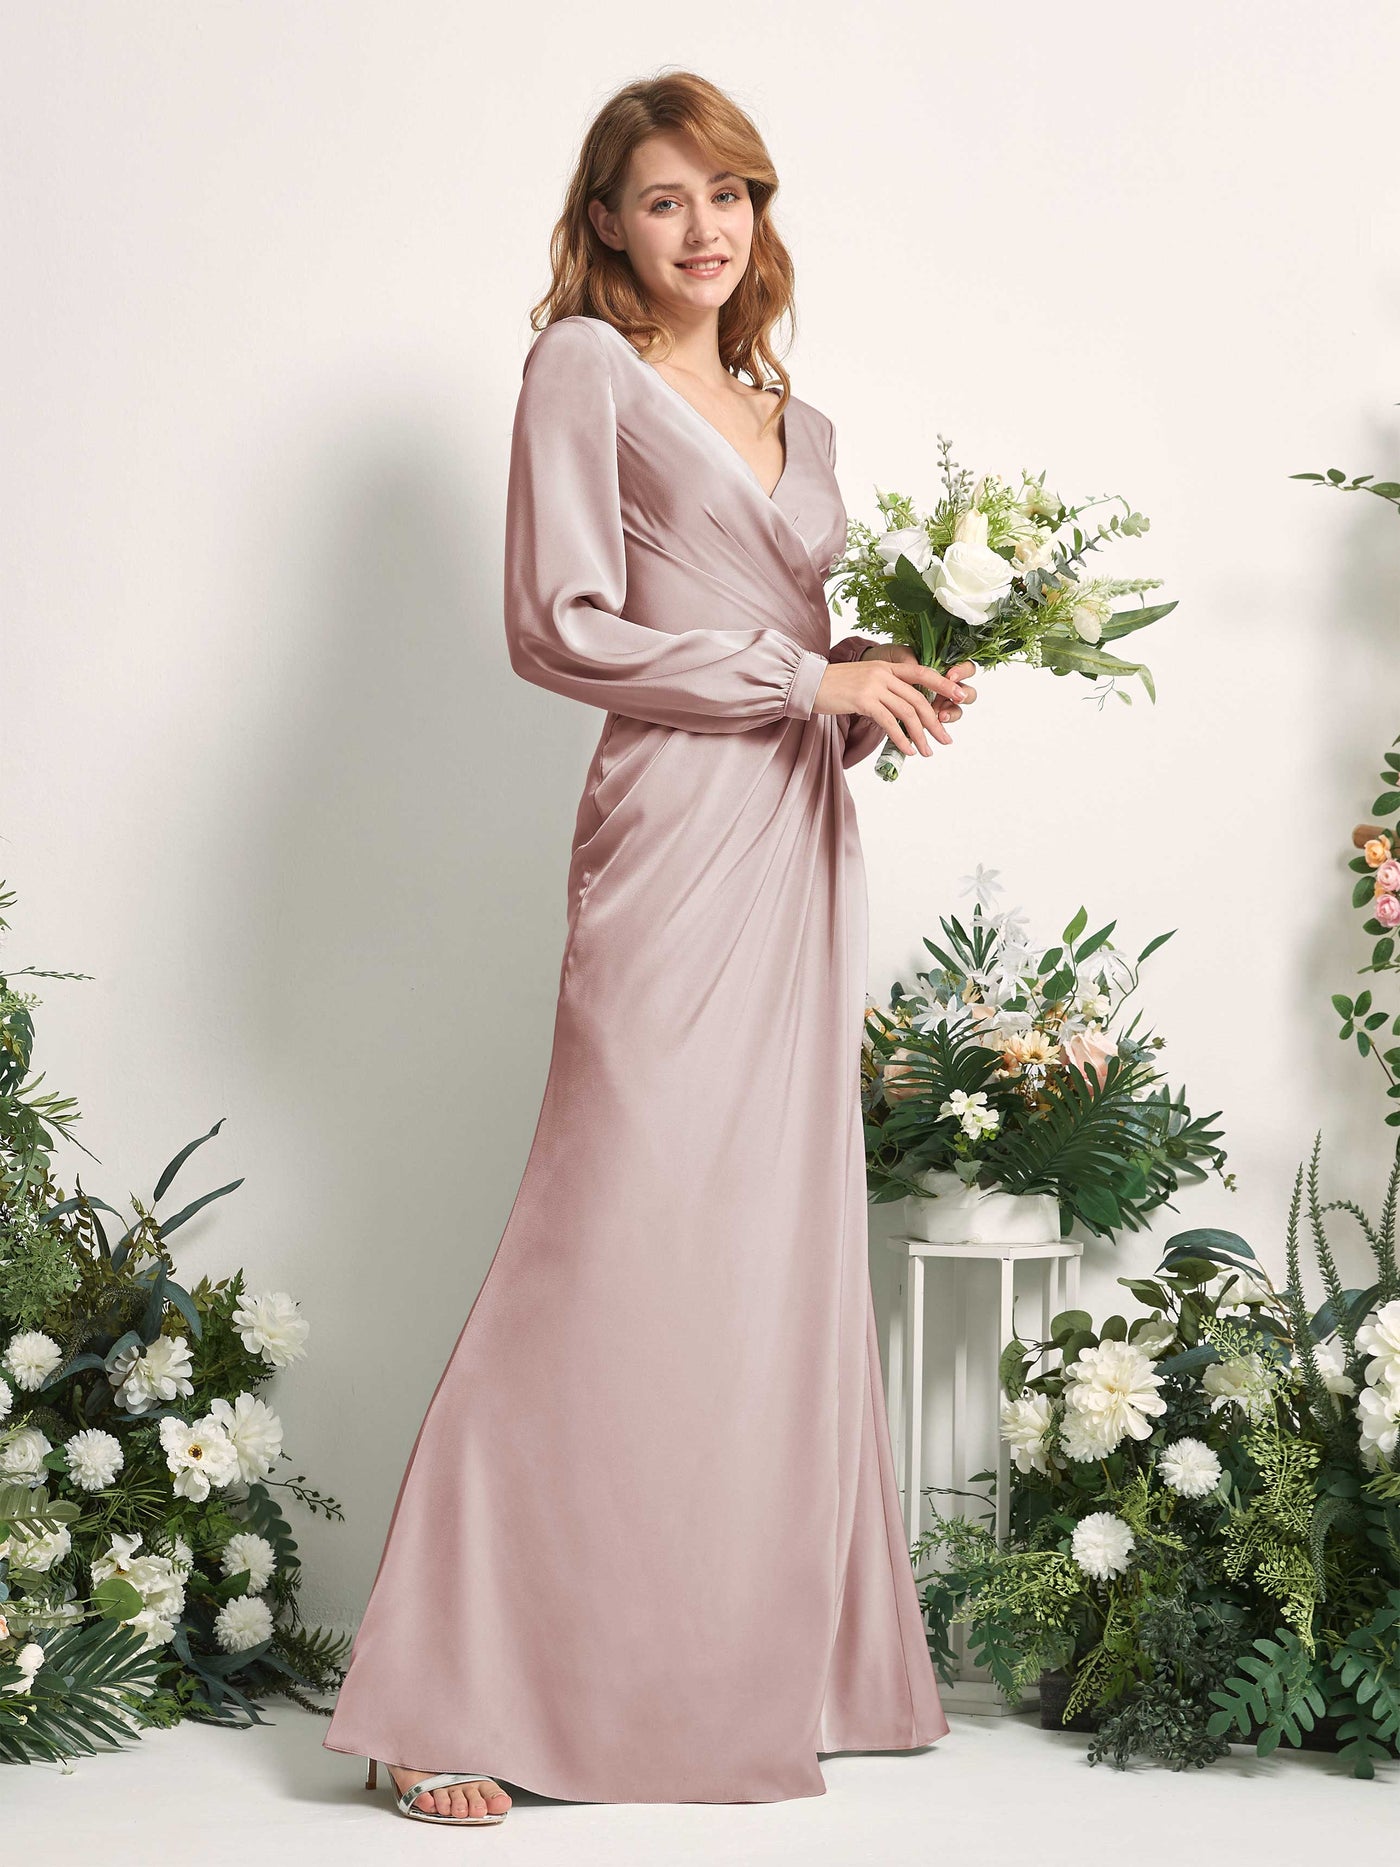 Dusty Rose Bridesmaid Dresses Bridesmaid Dress Ball Gown Satin V-neck Full Length Long Sleeves Wedding Party Dress (80225154)#color_dusty-rose